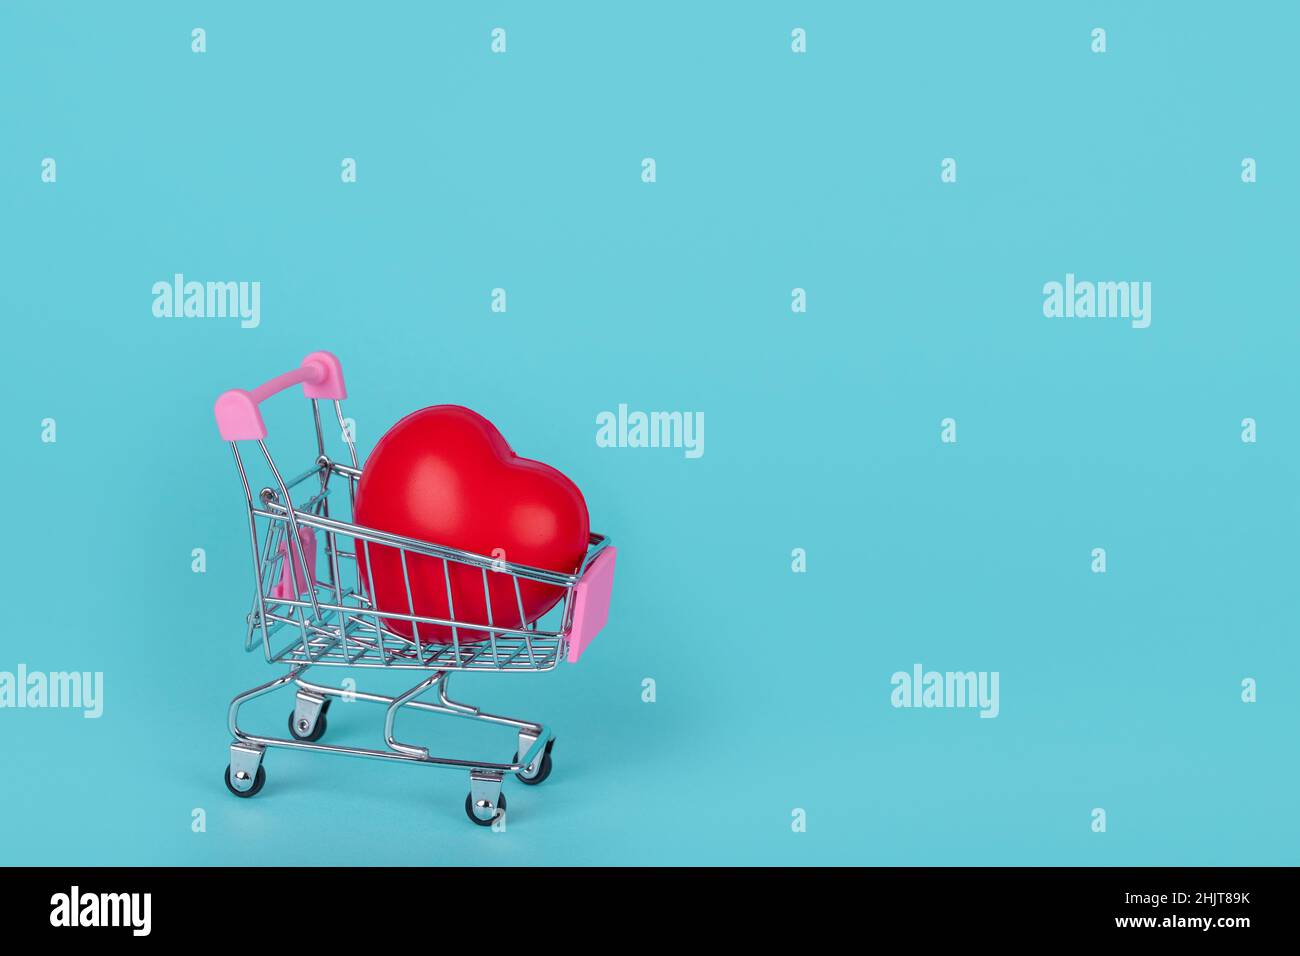 Shopping trolley with red heart on blue background. Creative idea for Valentines, Mothers or International Women's Day shopping and sale. Copy space. Stock Photo